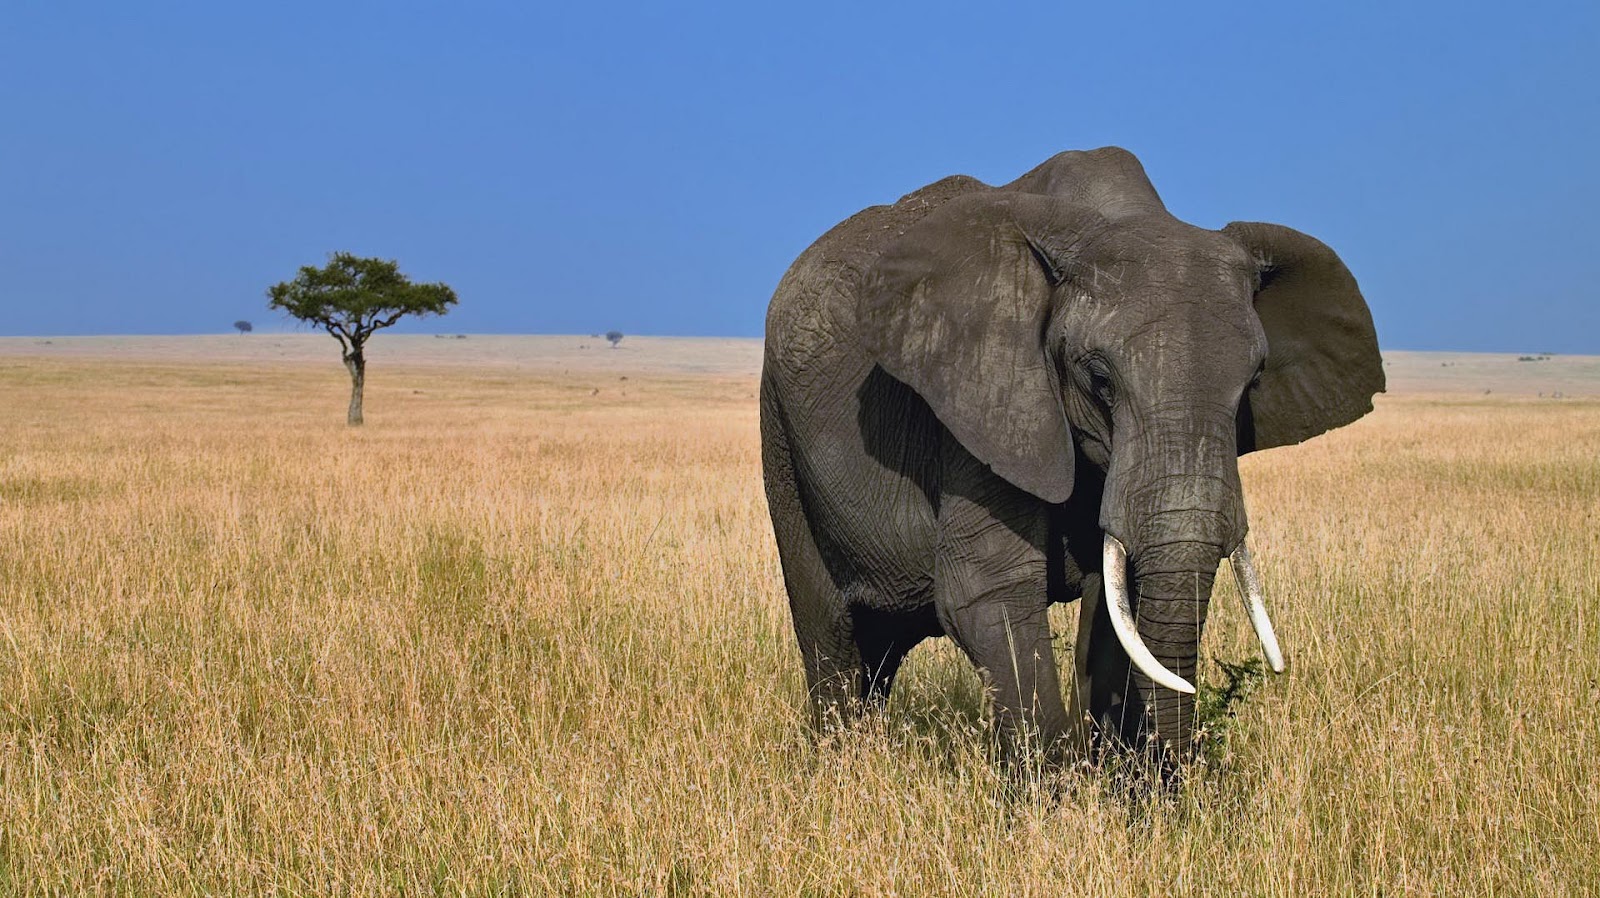 HD animal wallpaper with a big elephant in the wild HD elephant 1600x898